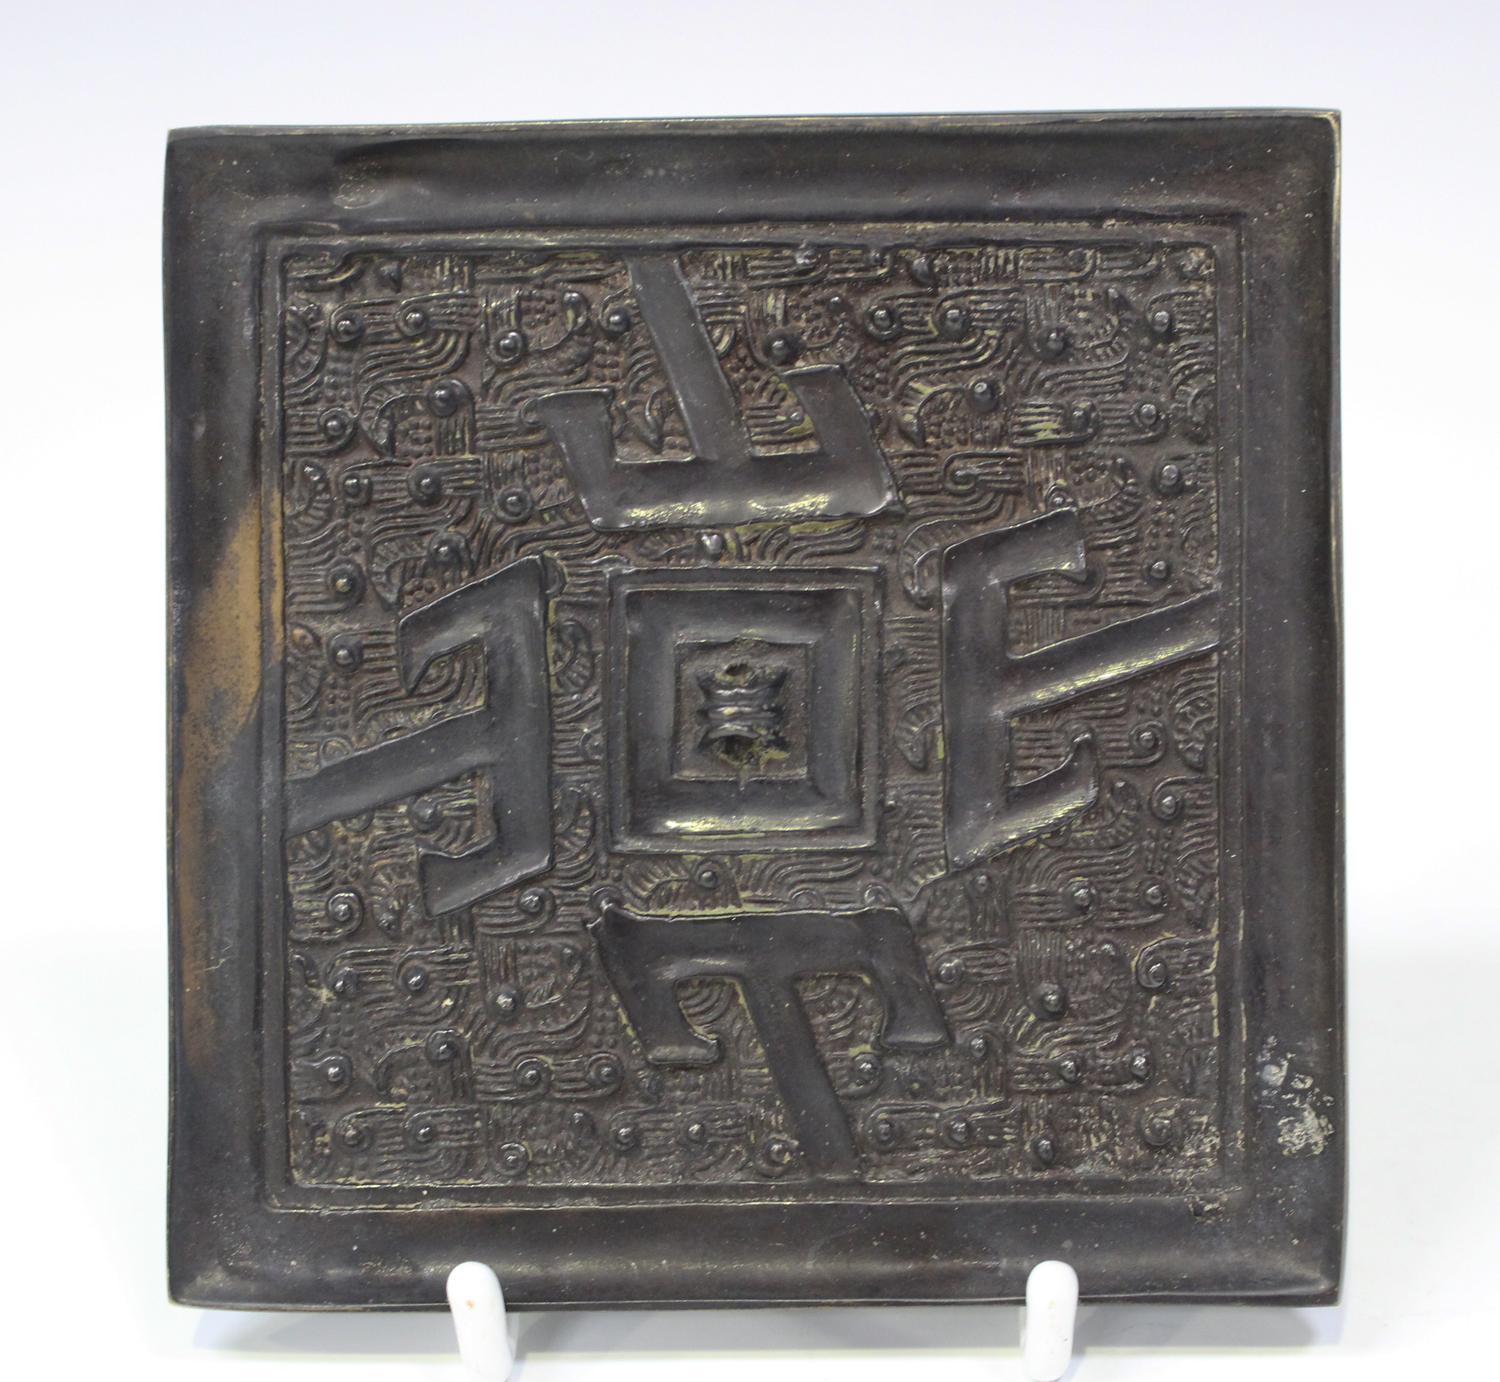 A Chinese archaic bronze square mirror, probably Warring States period (480-221 BC), one side cast